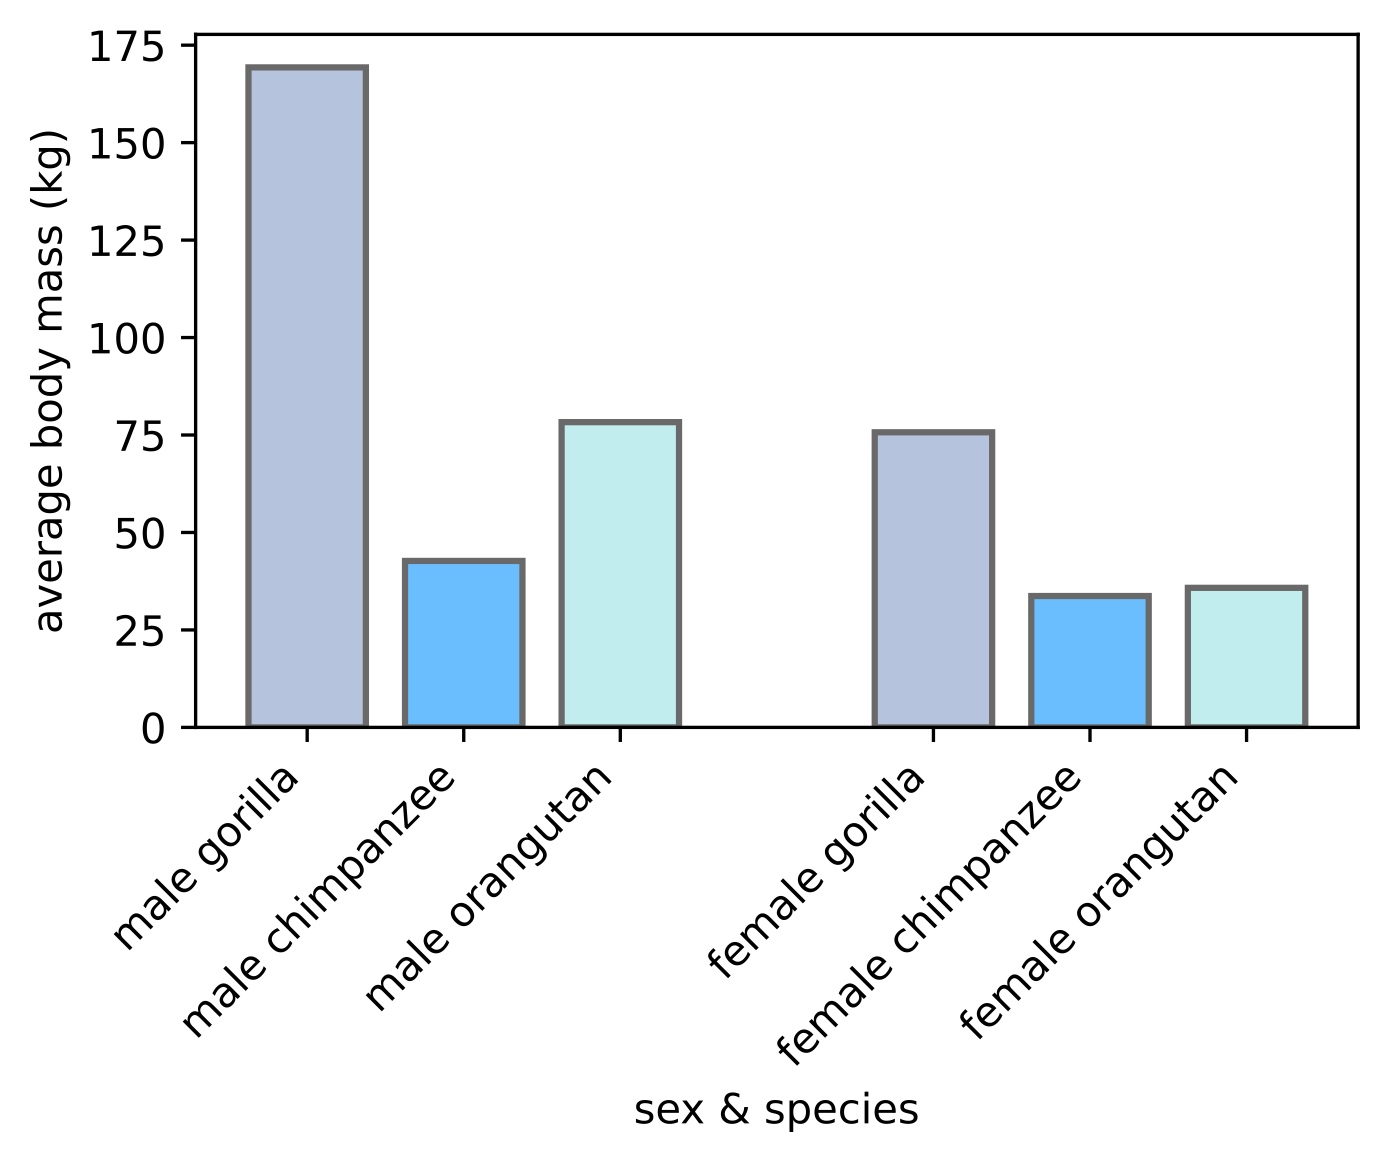 Primate body masses by sex and species.